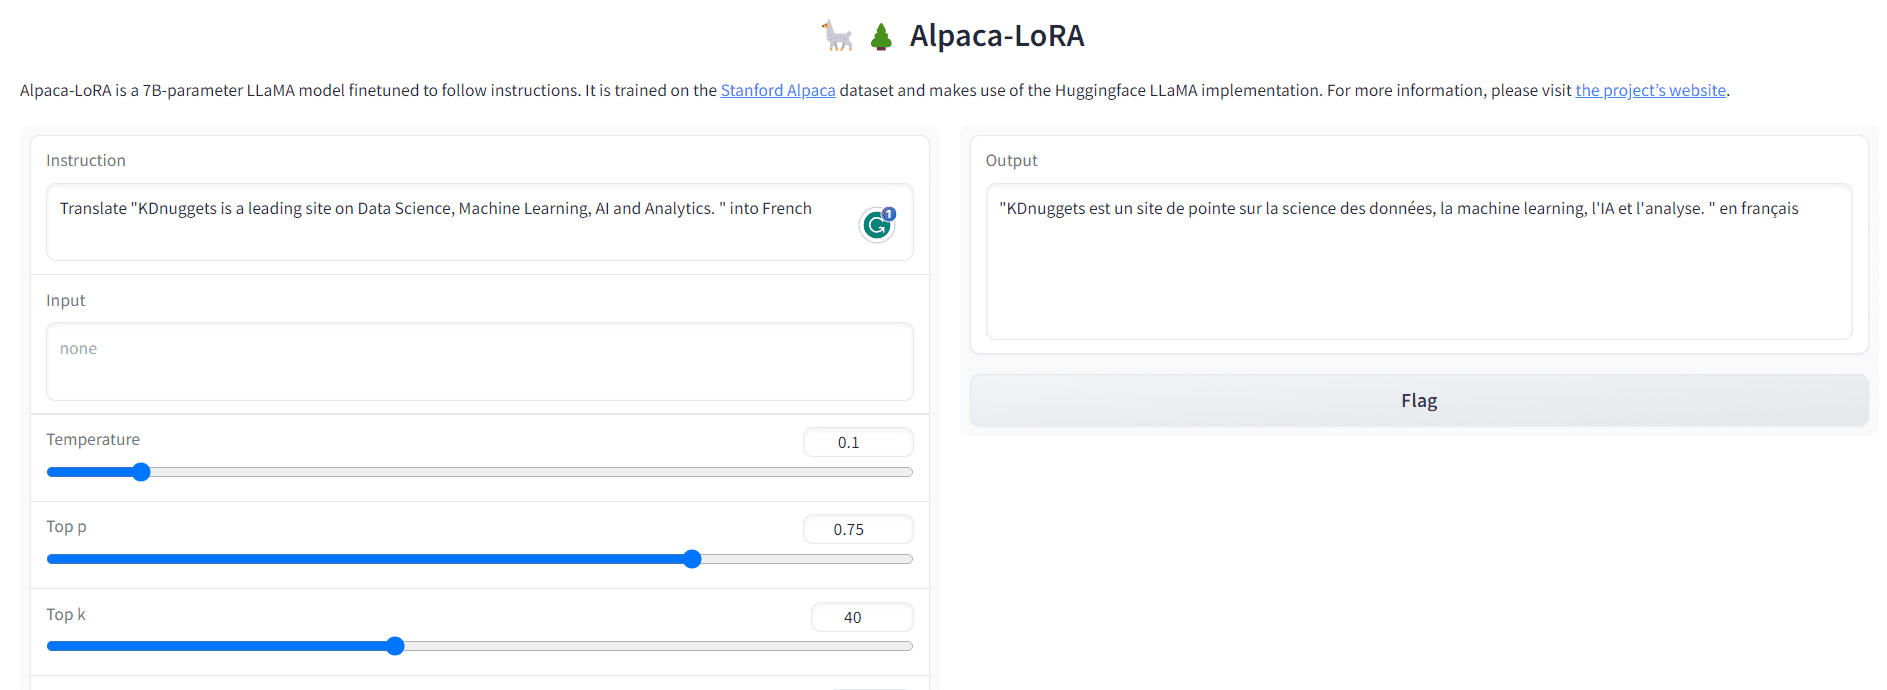 Learn How to Run Alpaca-LoRA on Your Device in Just a Few Steps